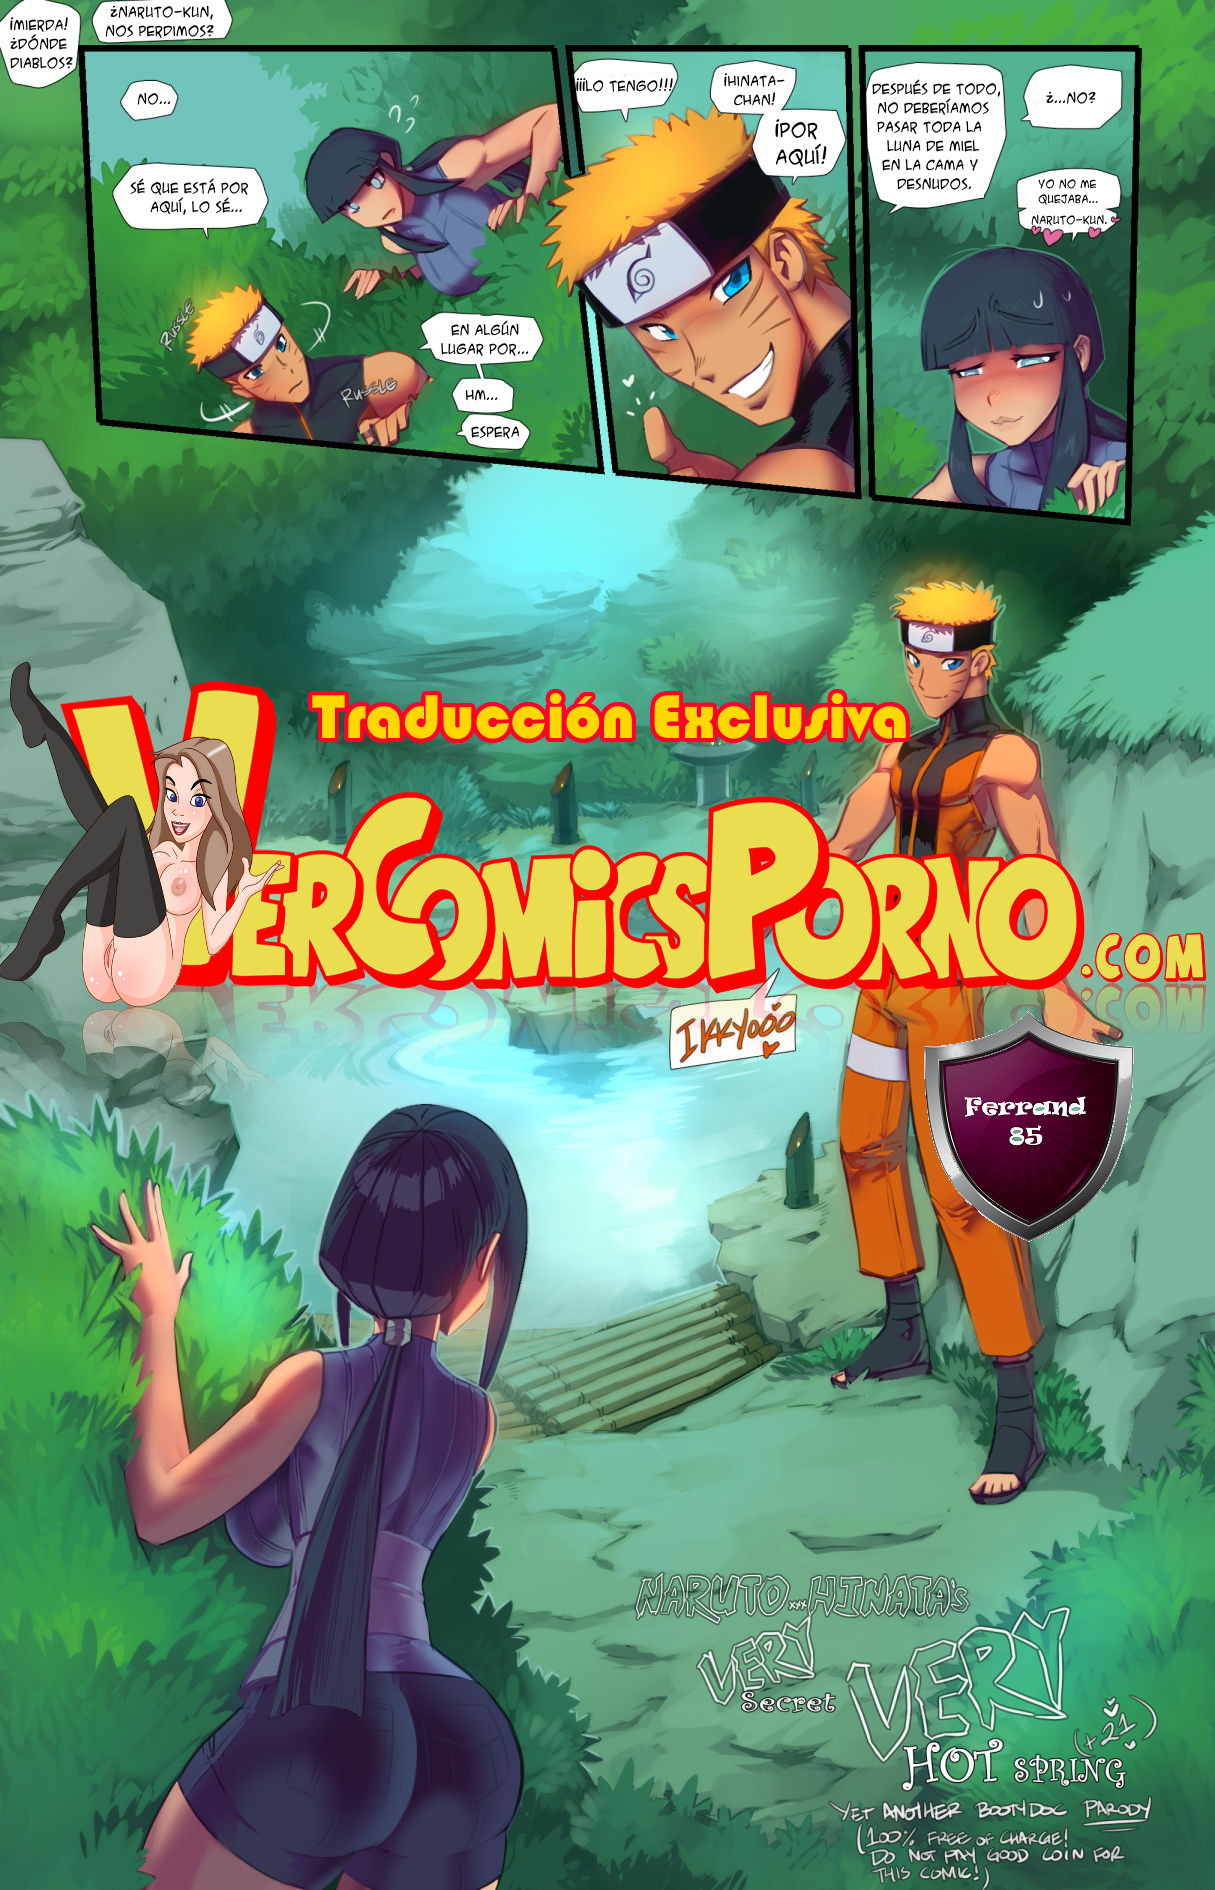 Naruto x Hinata very secret and very hot spring – Fred Perry - 0